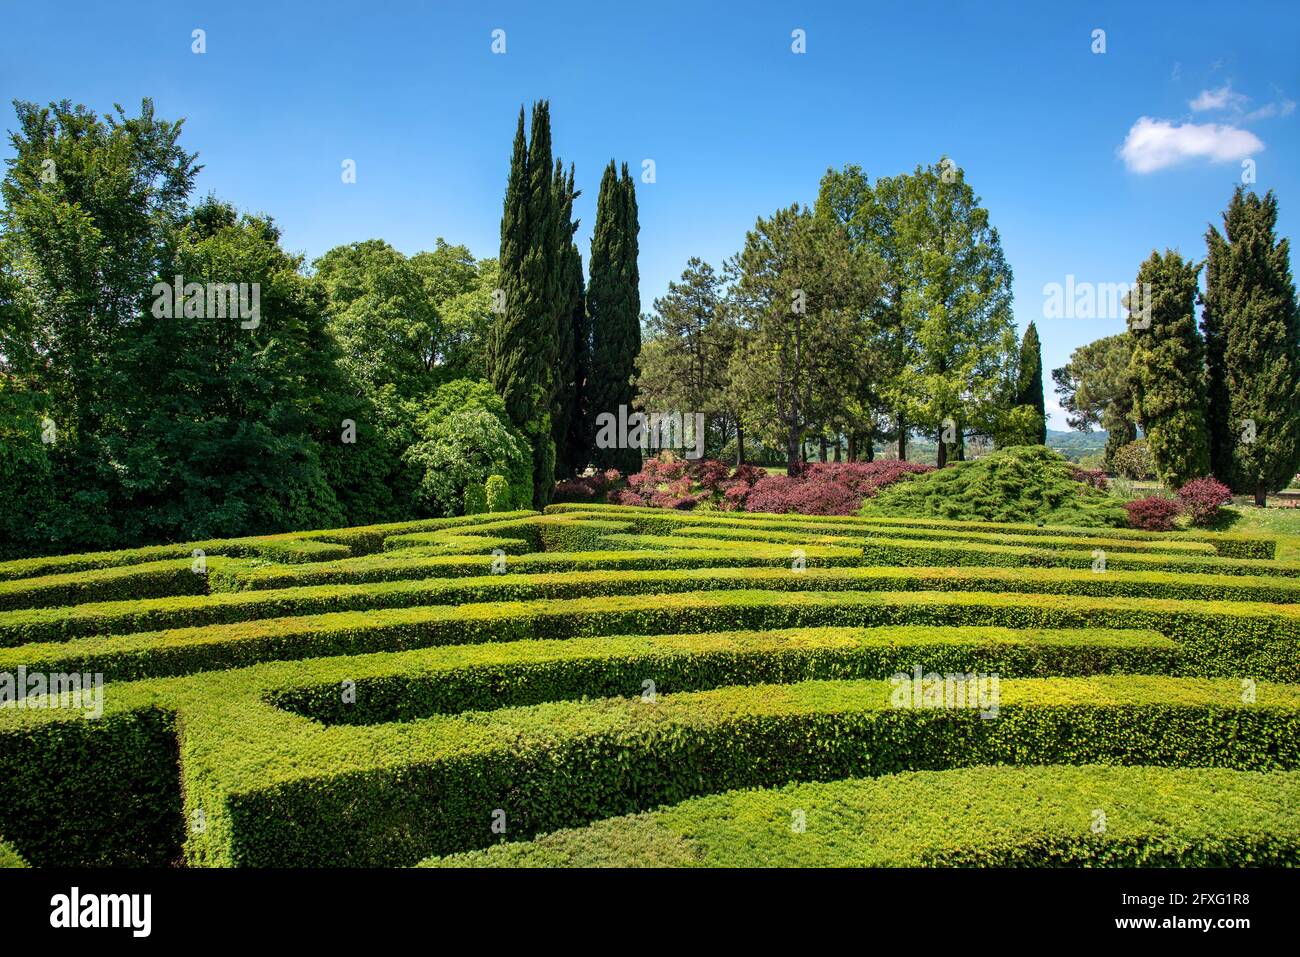 Formal Box or Buxus hedge maze in a garden or park looking across the pathways of the labyrinth to distant trees under a sunny blue sky Stock Photo